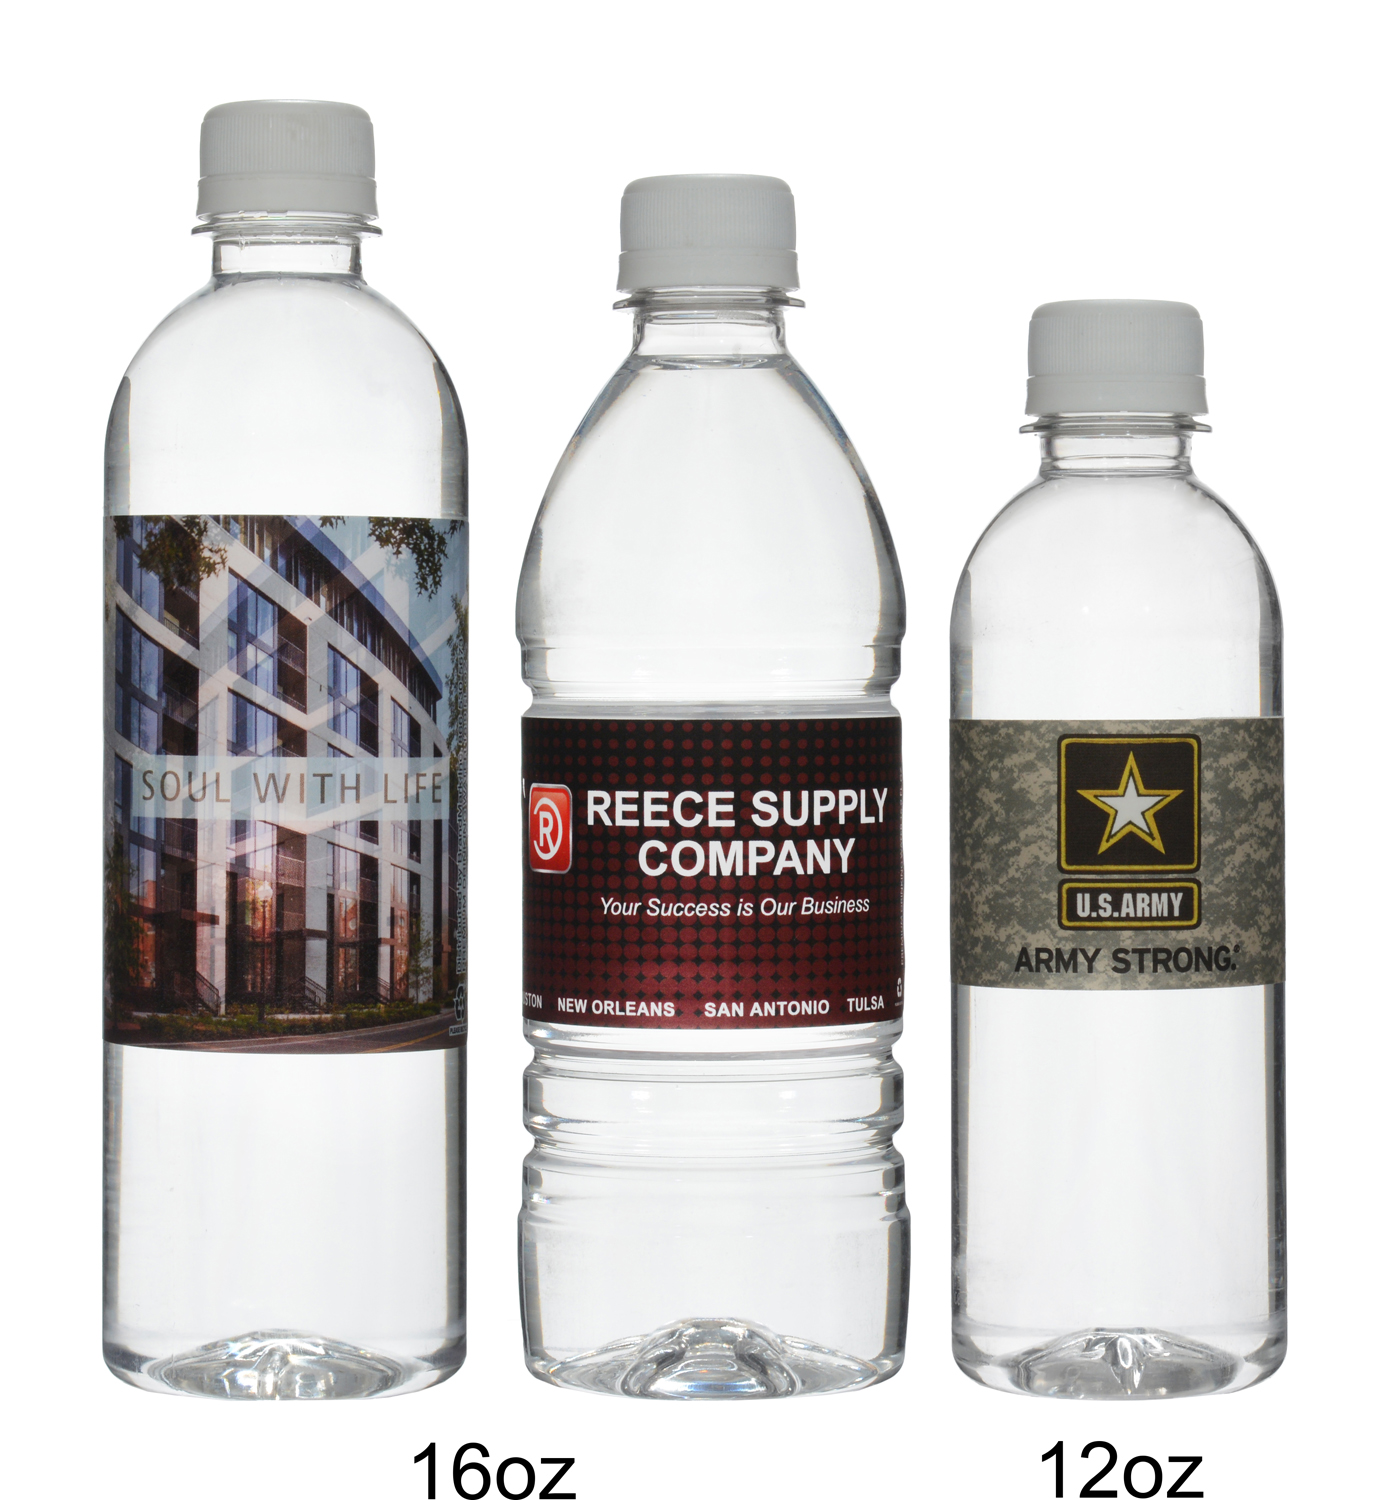 Custom water bottles produced and shipped from Idaho.